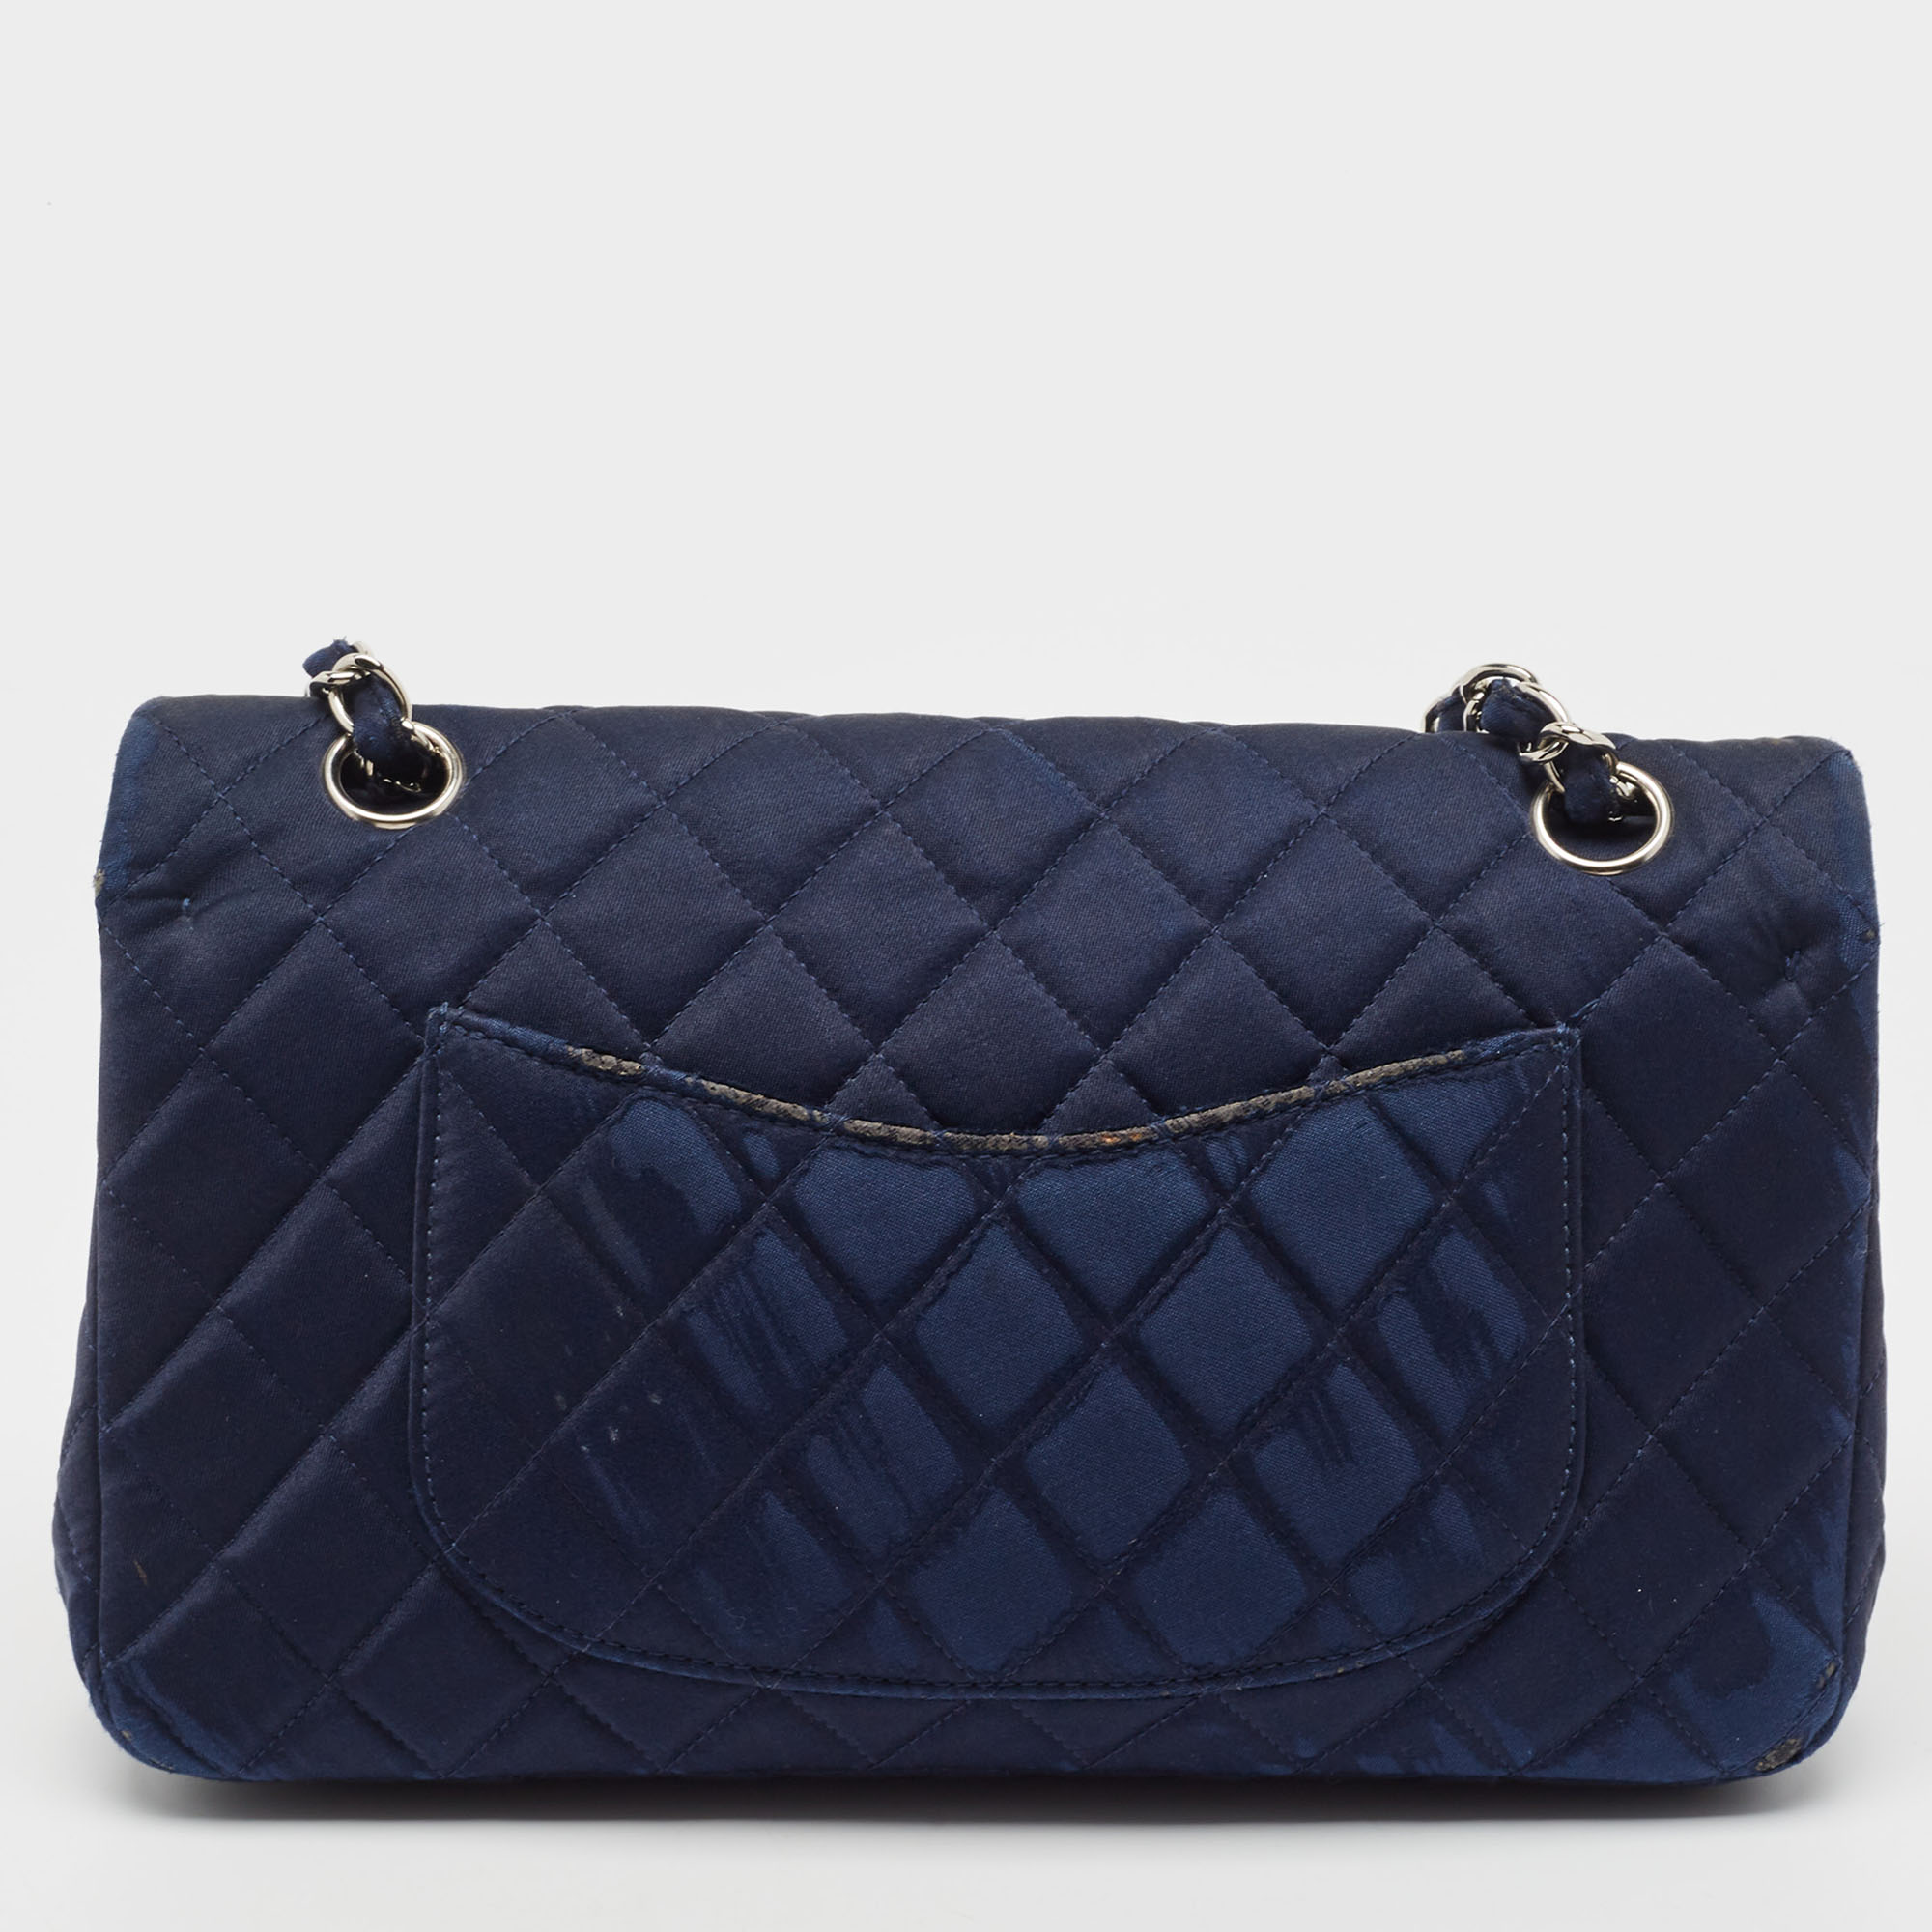 Chanel Navy Blue Quilted Satin Medium Classic Double Flap Bag